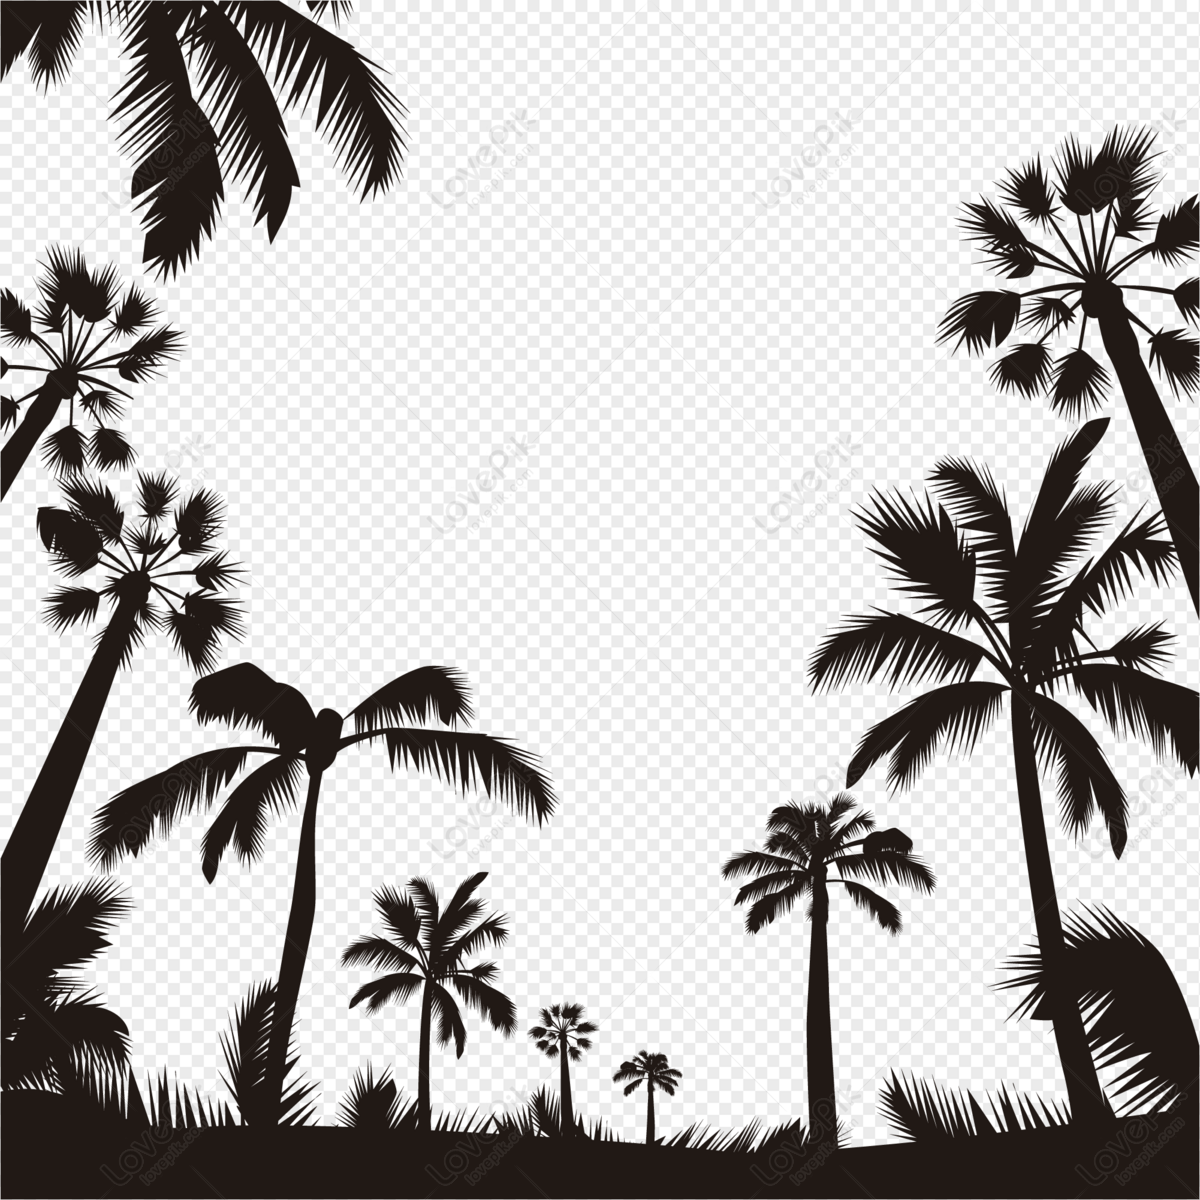 Coconut tree silhouette border, tree, silhouette border, silhouette png hd transparent image